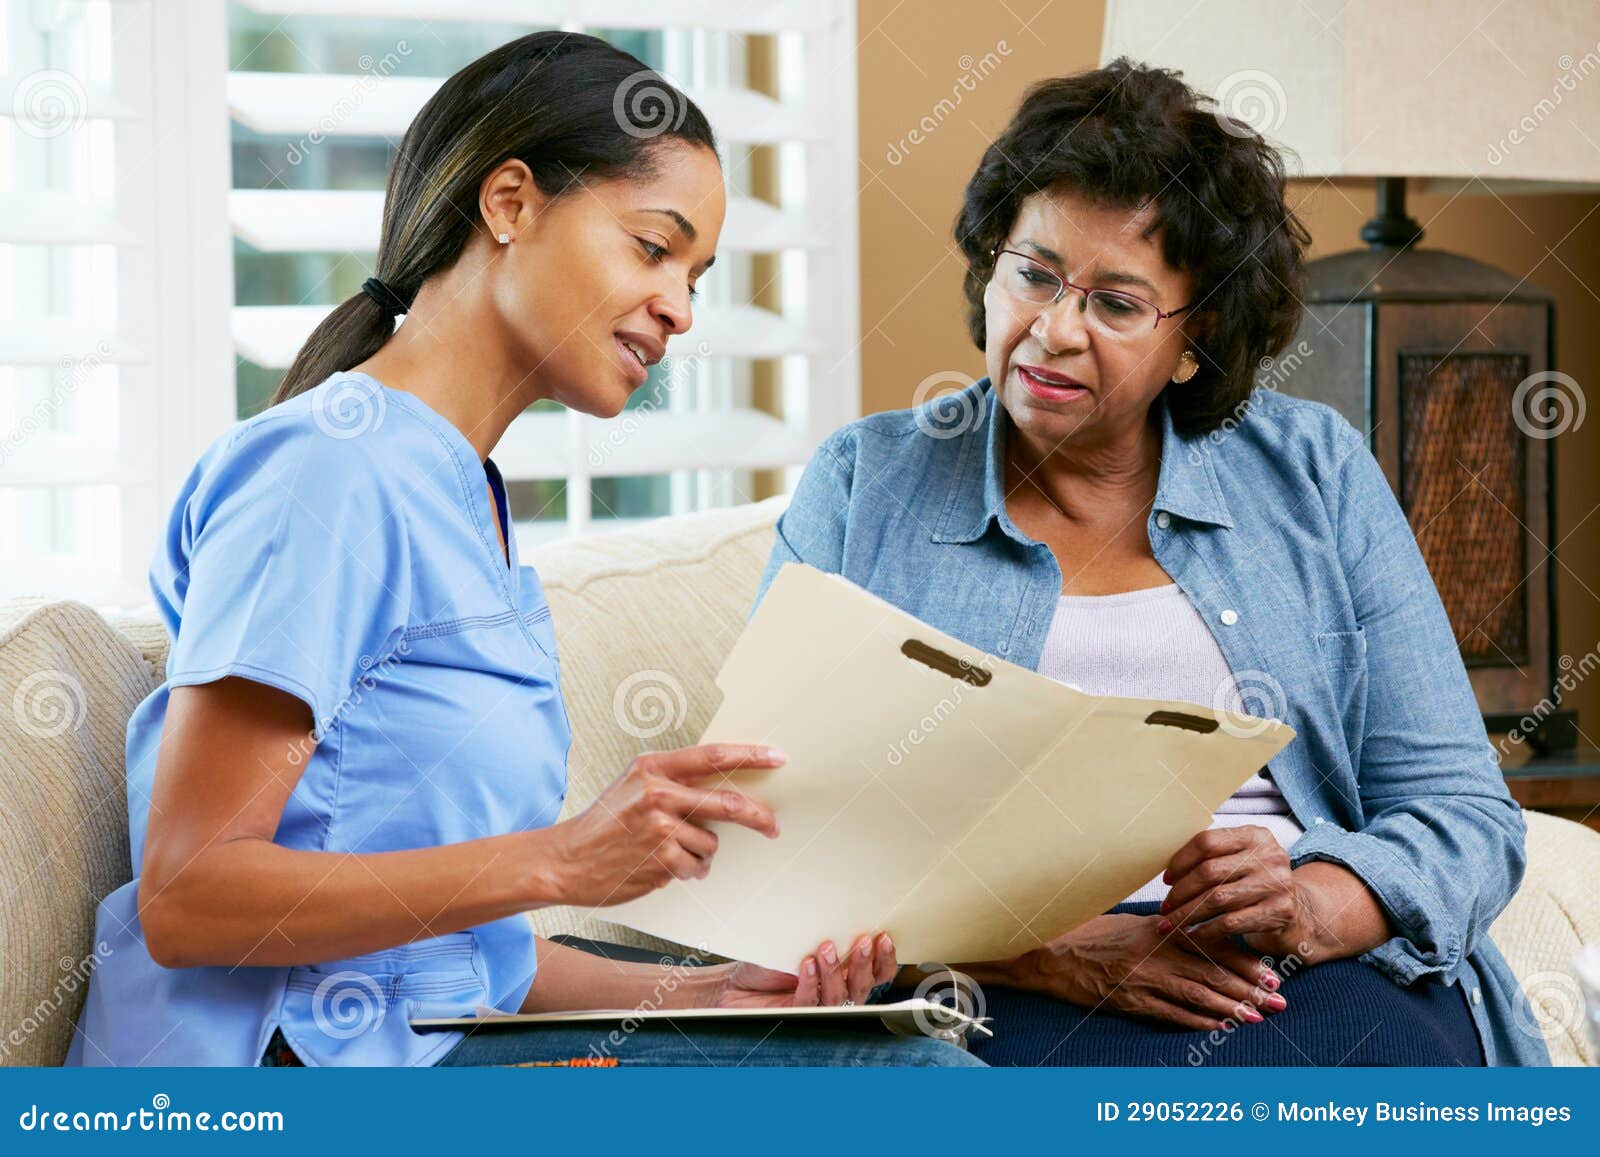 nurse discussing records with senior female patient during home